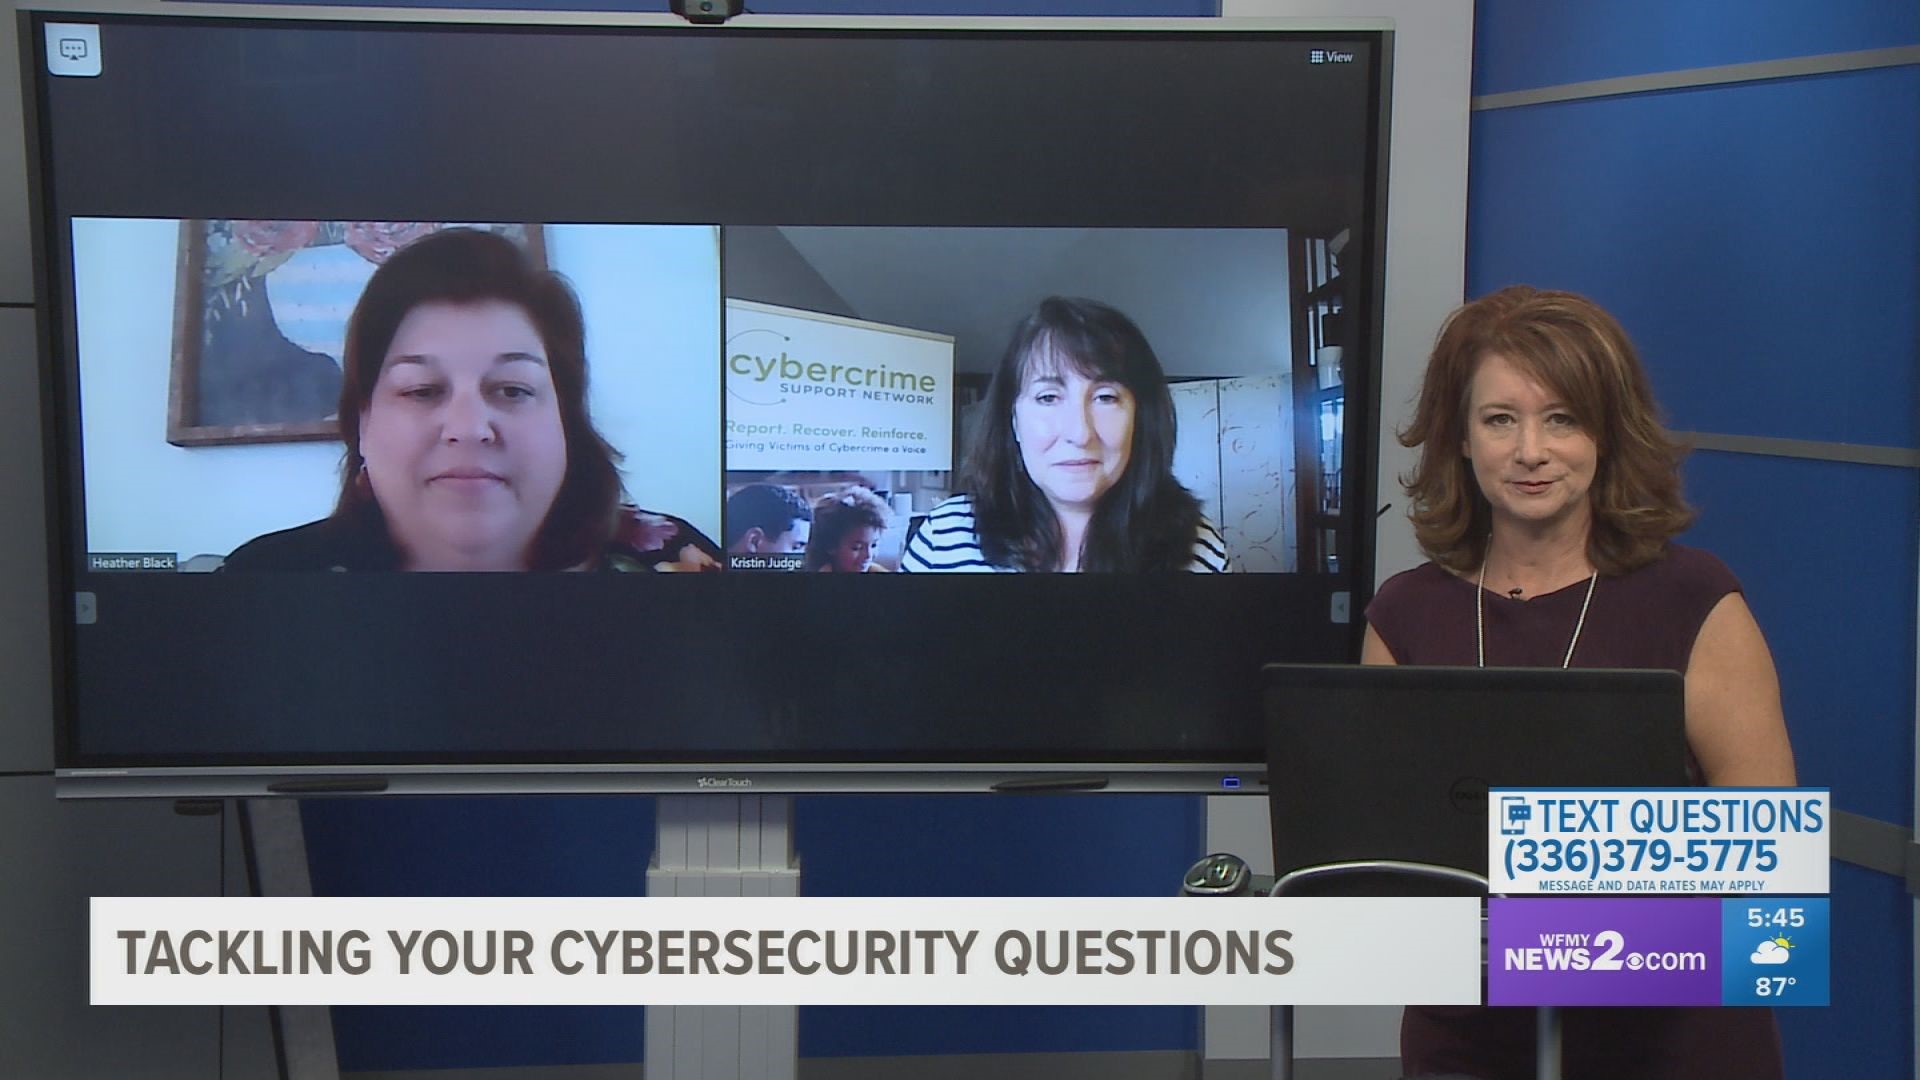 Our experts showed us why cyber security help is much closer than you may think.